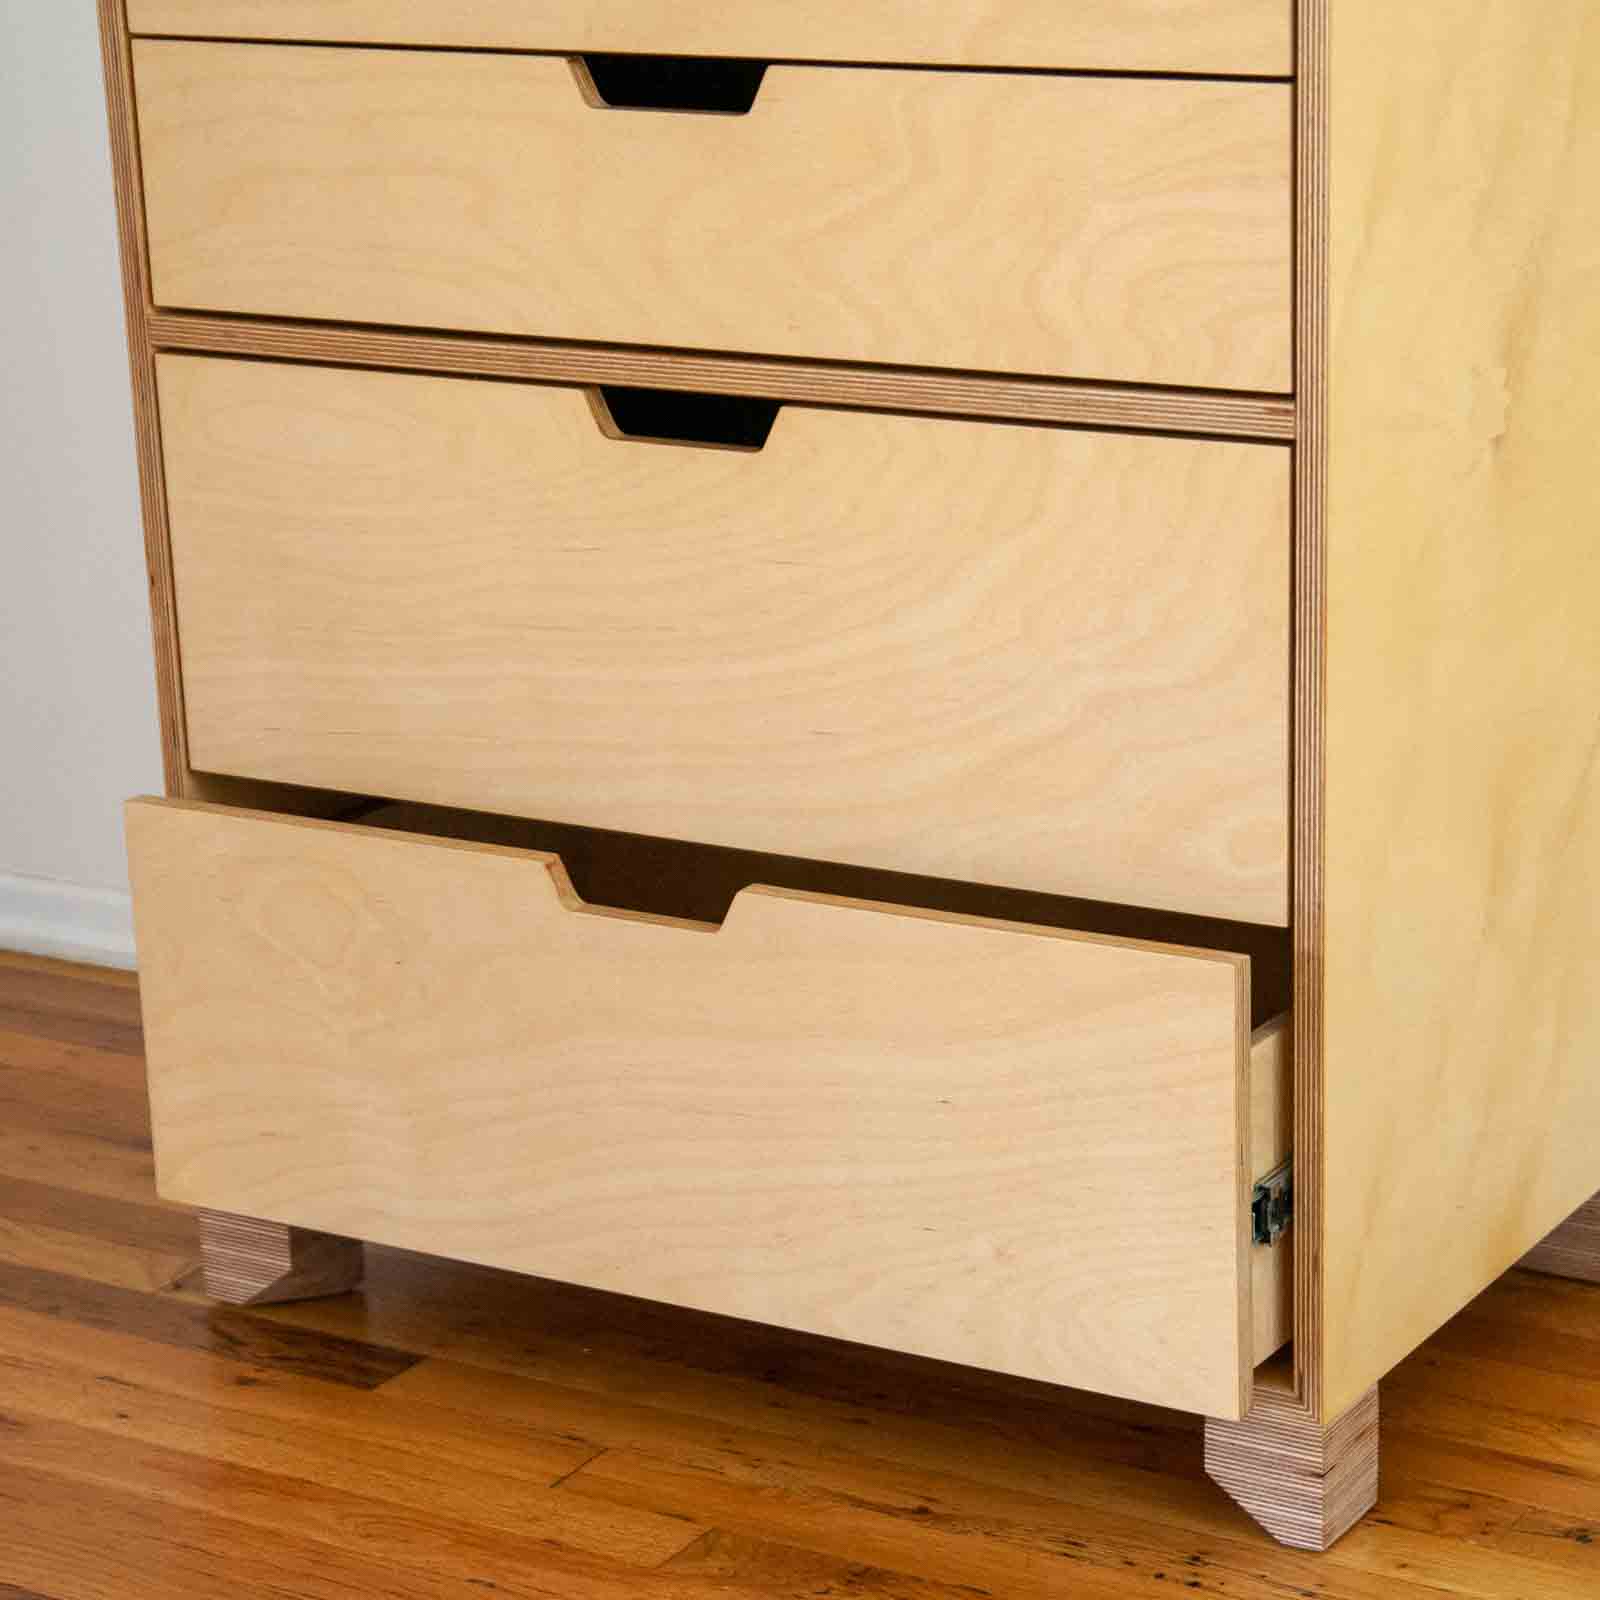 Off-angle photo of dresser with bottom drawer ajar